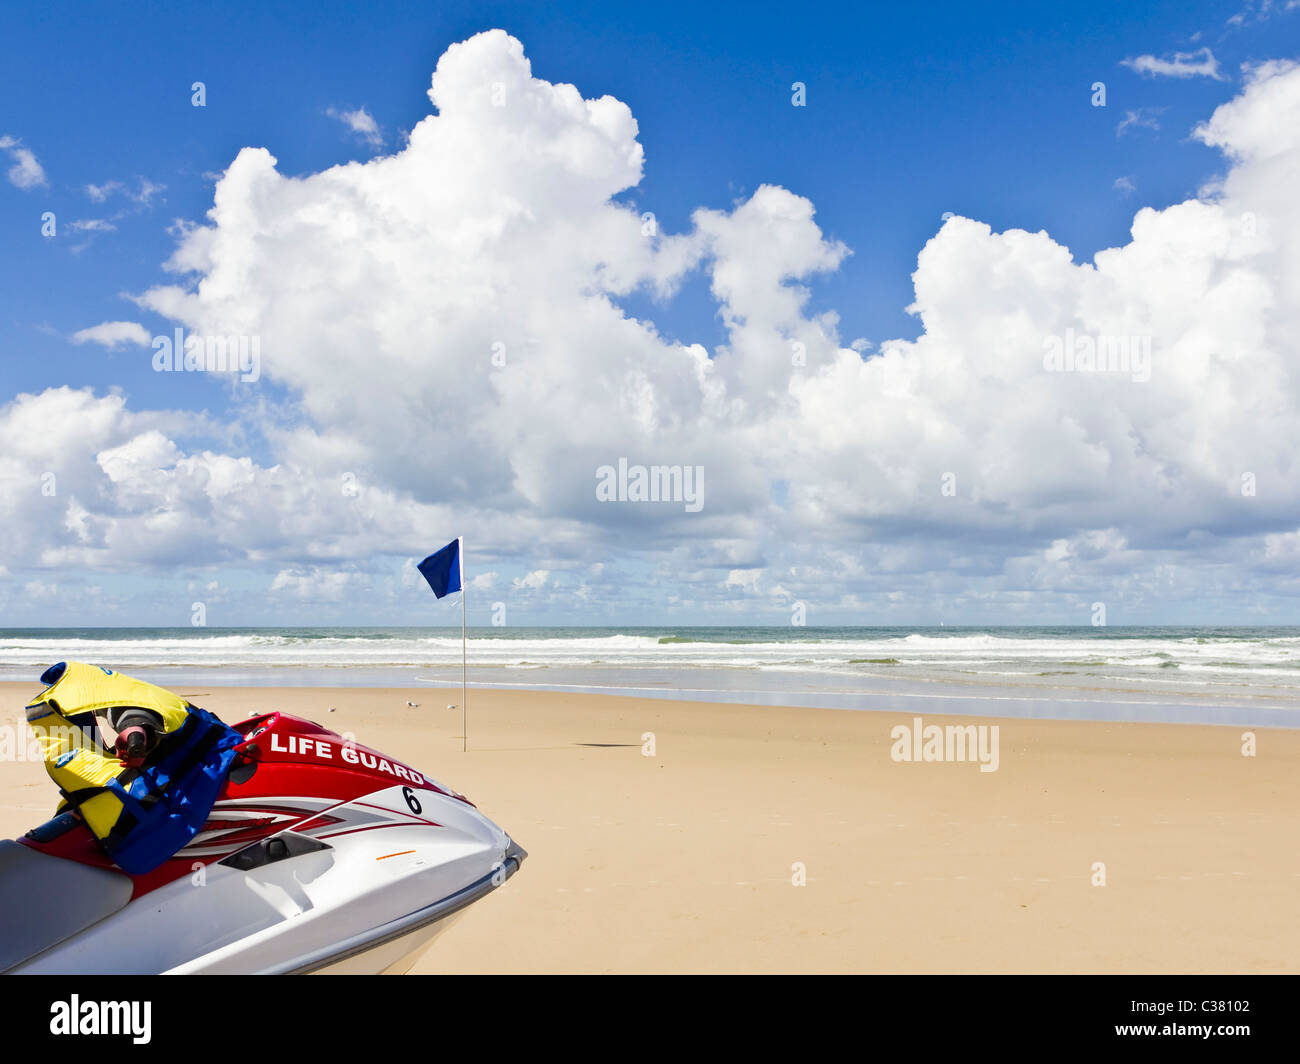 Beach lifeguard rescue boat on sand with waves and gathering storm Stock Photo